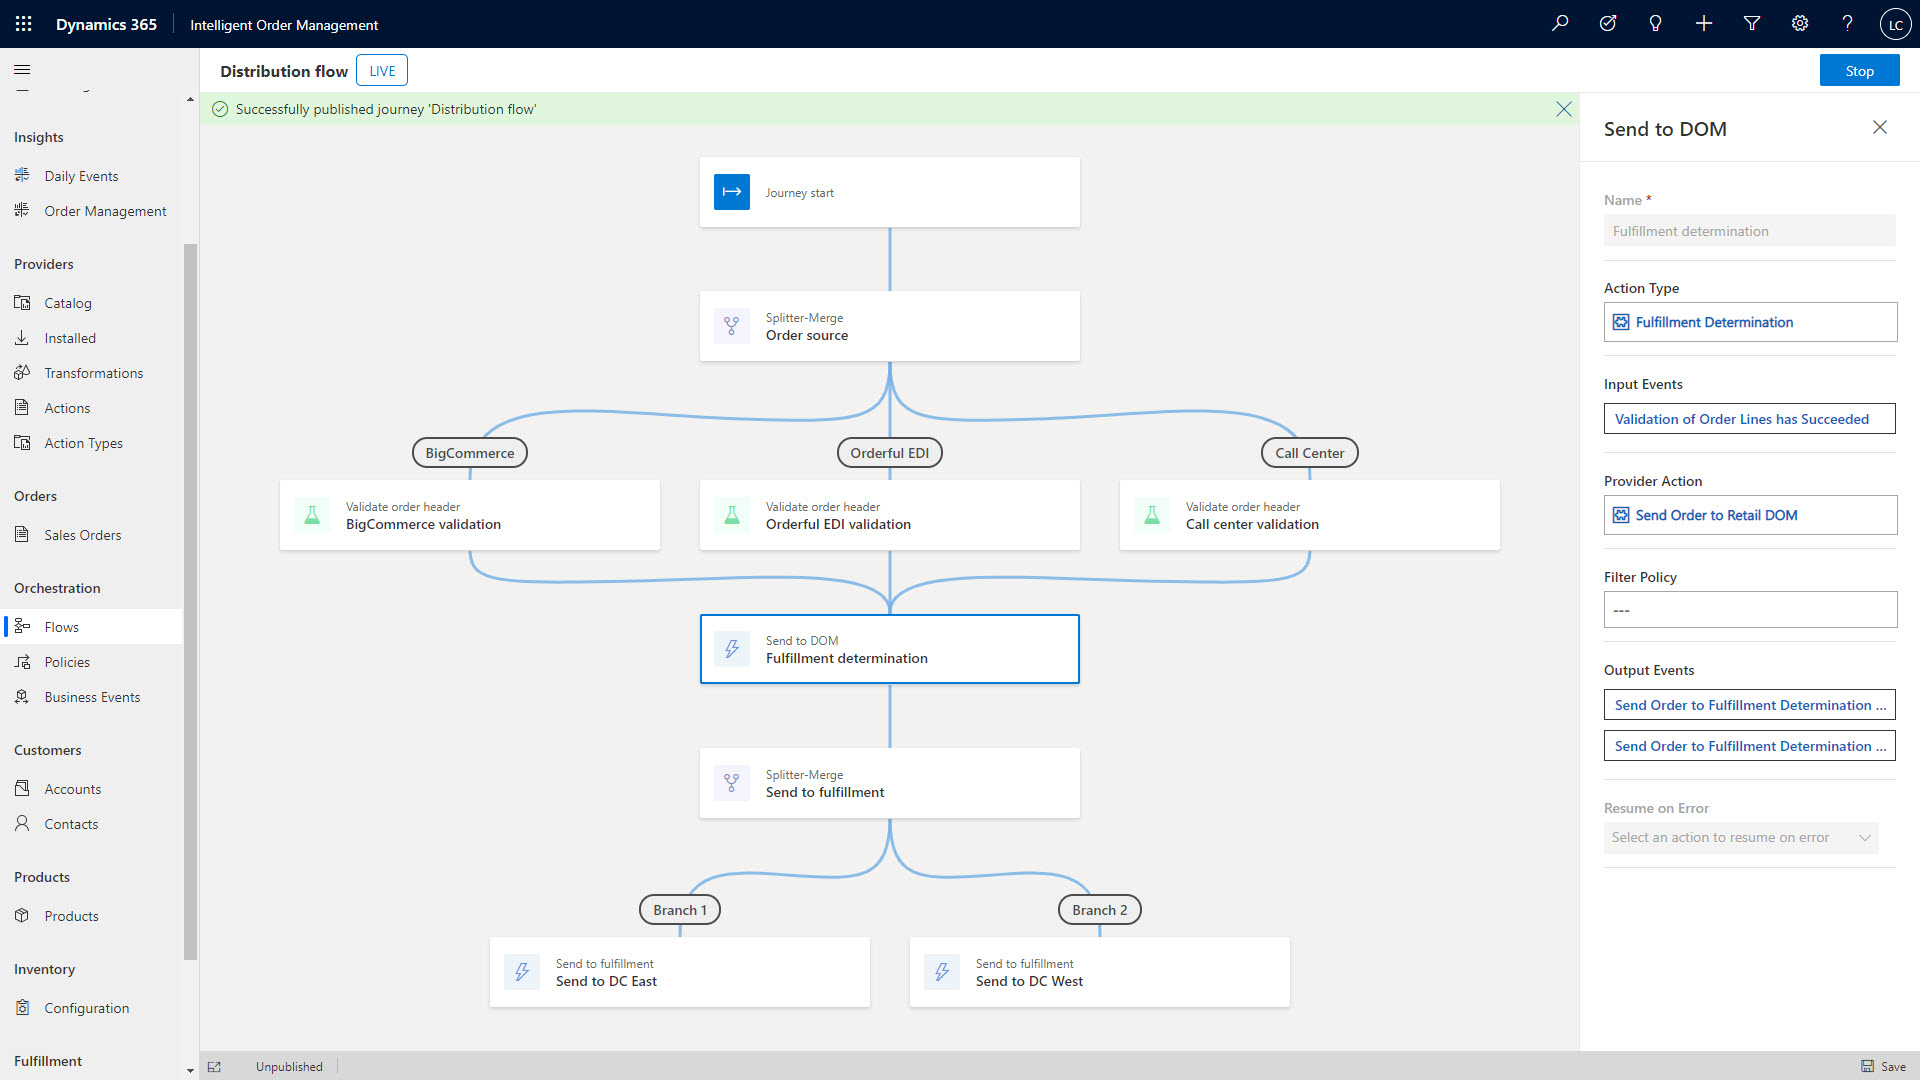 an example of how the order orchestration designer tool can help modify the order journey